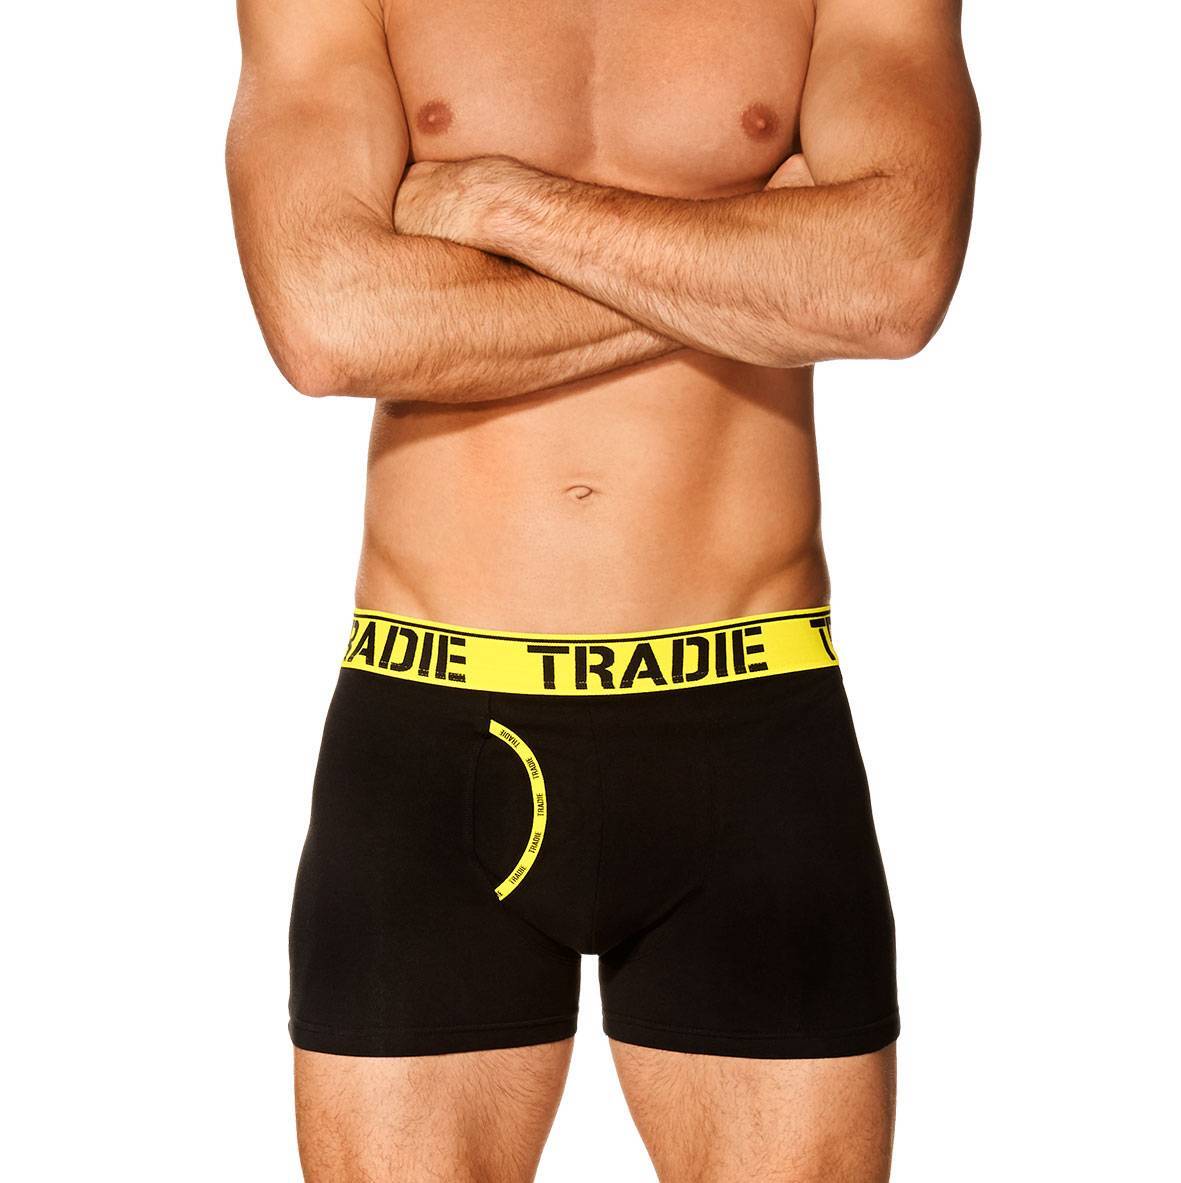 Mens 2 Pack Tradie S-2XL Cotton Boxer Shorts Man Front Trunk Black Yellow  (1SK)